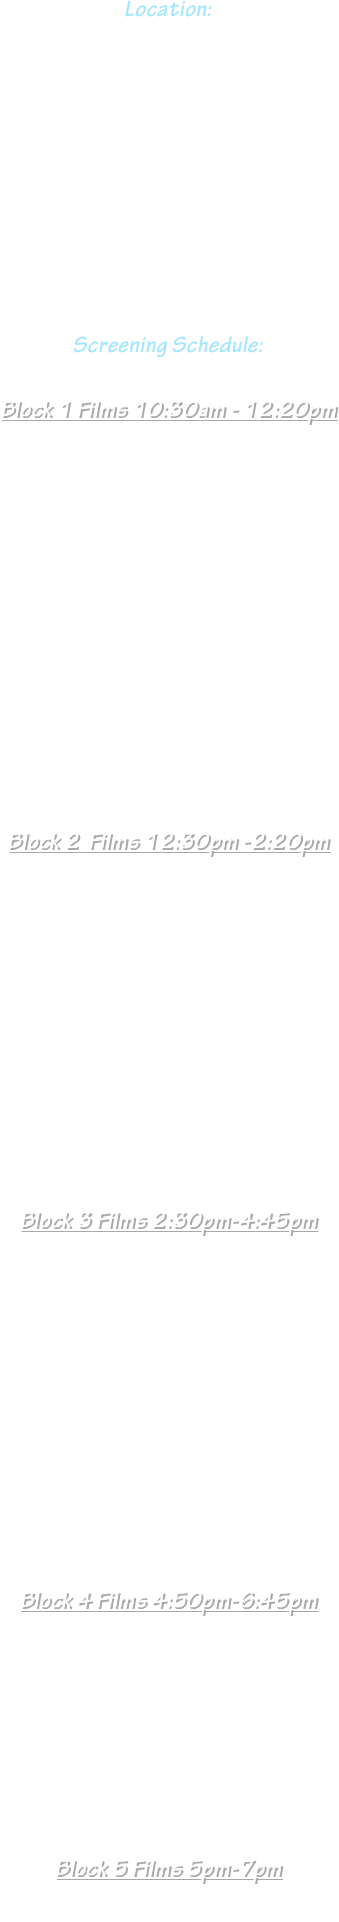 
Location: 
Hudson Theater
6539 Santa Monica Blvd. 
Hollywood, CA 90038

April  7th  2024









Screening Schedule:


Block 1 Films 10:30am - 12:20pm

“ Fred and Frankie ”
“ Clout Chaser ”
“ DREAMERS ”
“ LUKi and the Lights ”
“ The Translator ”
“ Das Pickle ”
“ Next Train Out ”












Block 2  Films 12:30pm -2:20pm

“ Hanky Panky ”

















Block 3 Films 2:30pm-4:45pm

“  Pablo's Voices ”
















Block 4 Films 4:50pm-6:45pm

“ Pablo's Voices ”  

“ TBD ”








Block 5 Films 5pm-7pm

“ TBD ” 




















































